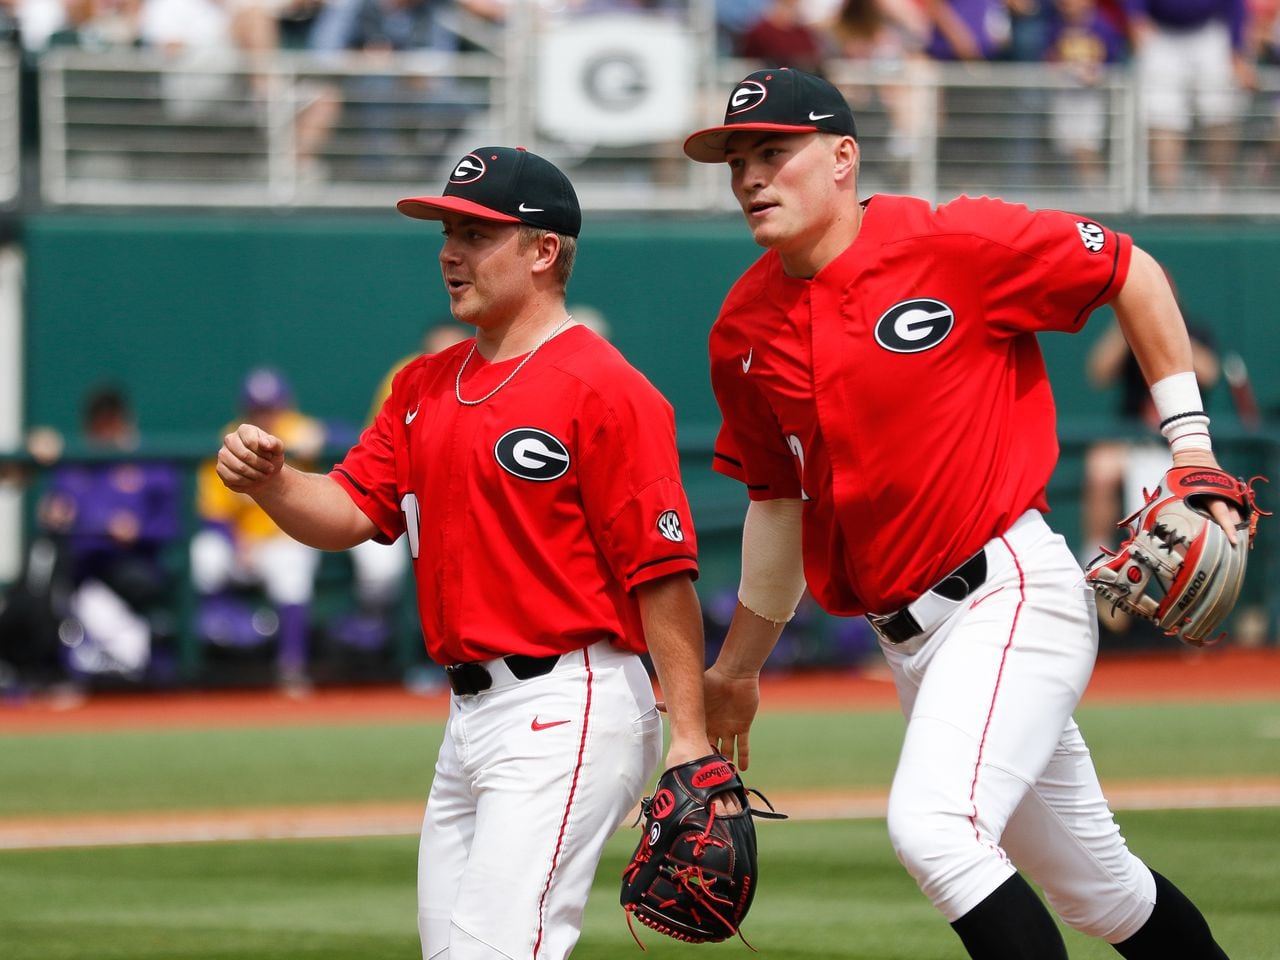 Georgia baseball stays put in rankings ahead of top-5 matchup with